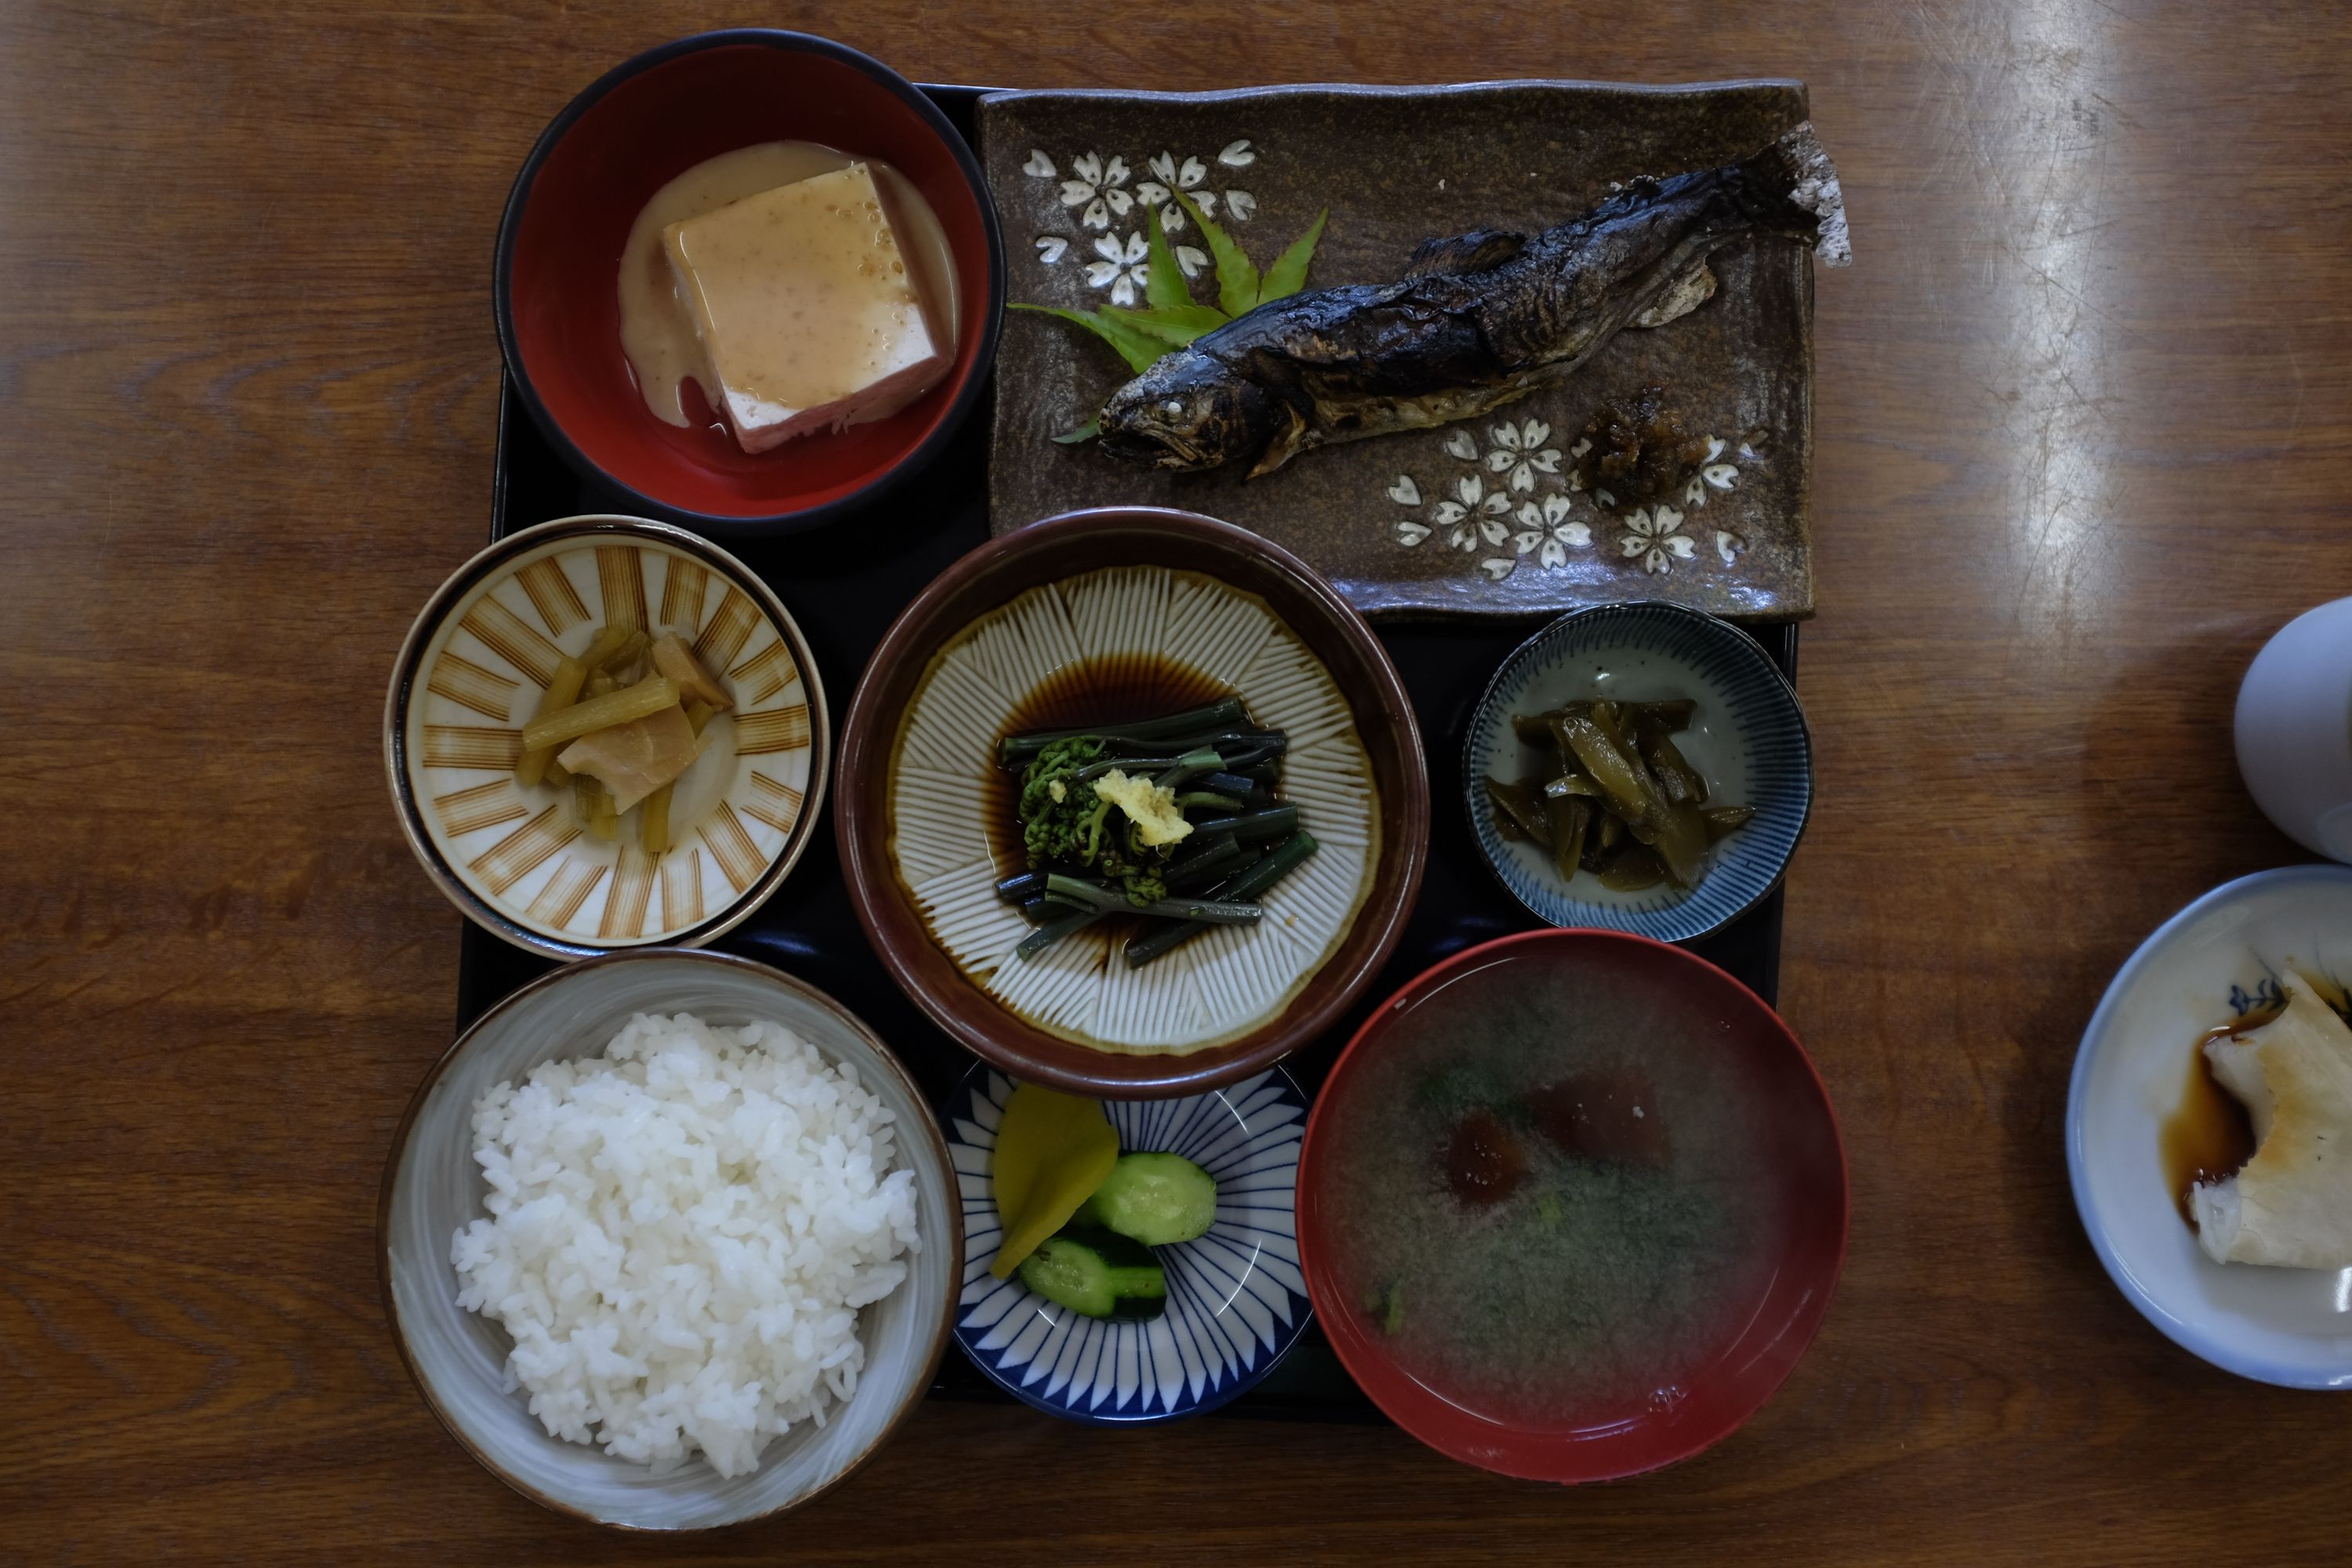 A Japanese lunch set of grilled trout, rice, miso soup, and various side dishes.